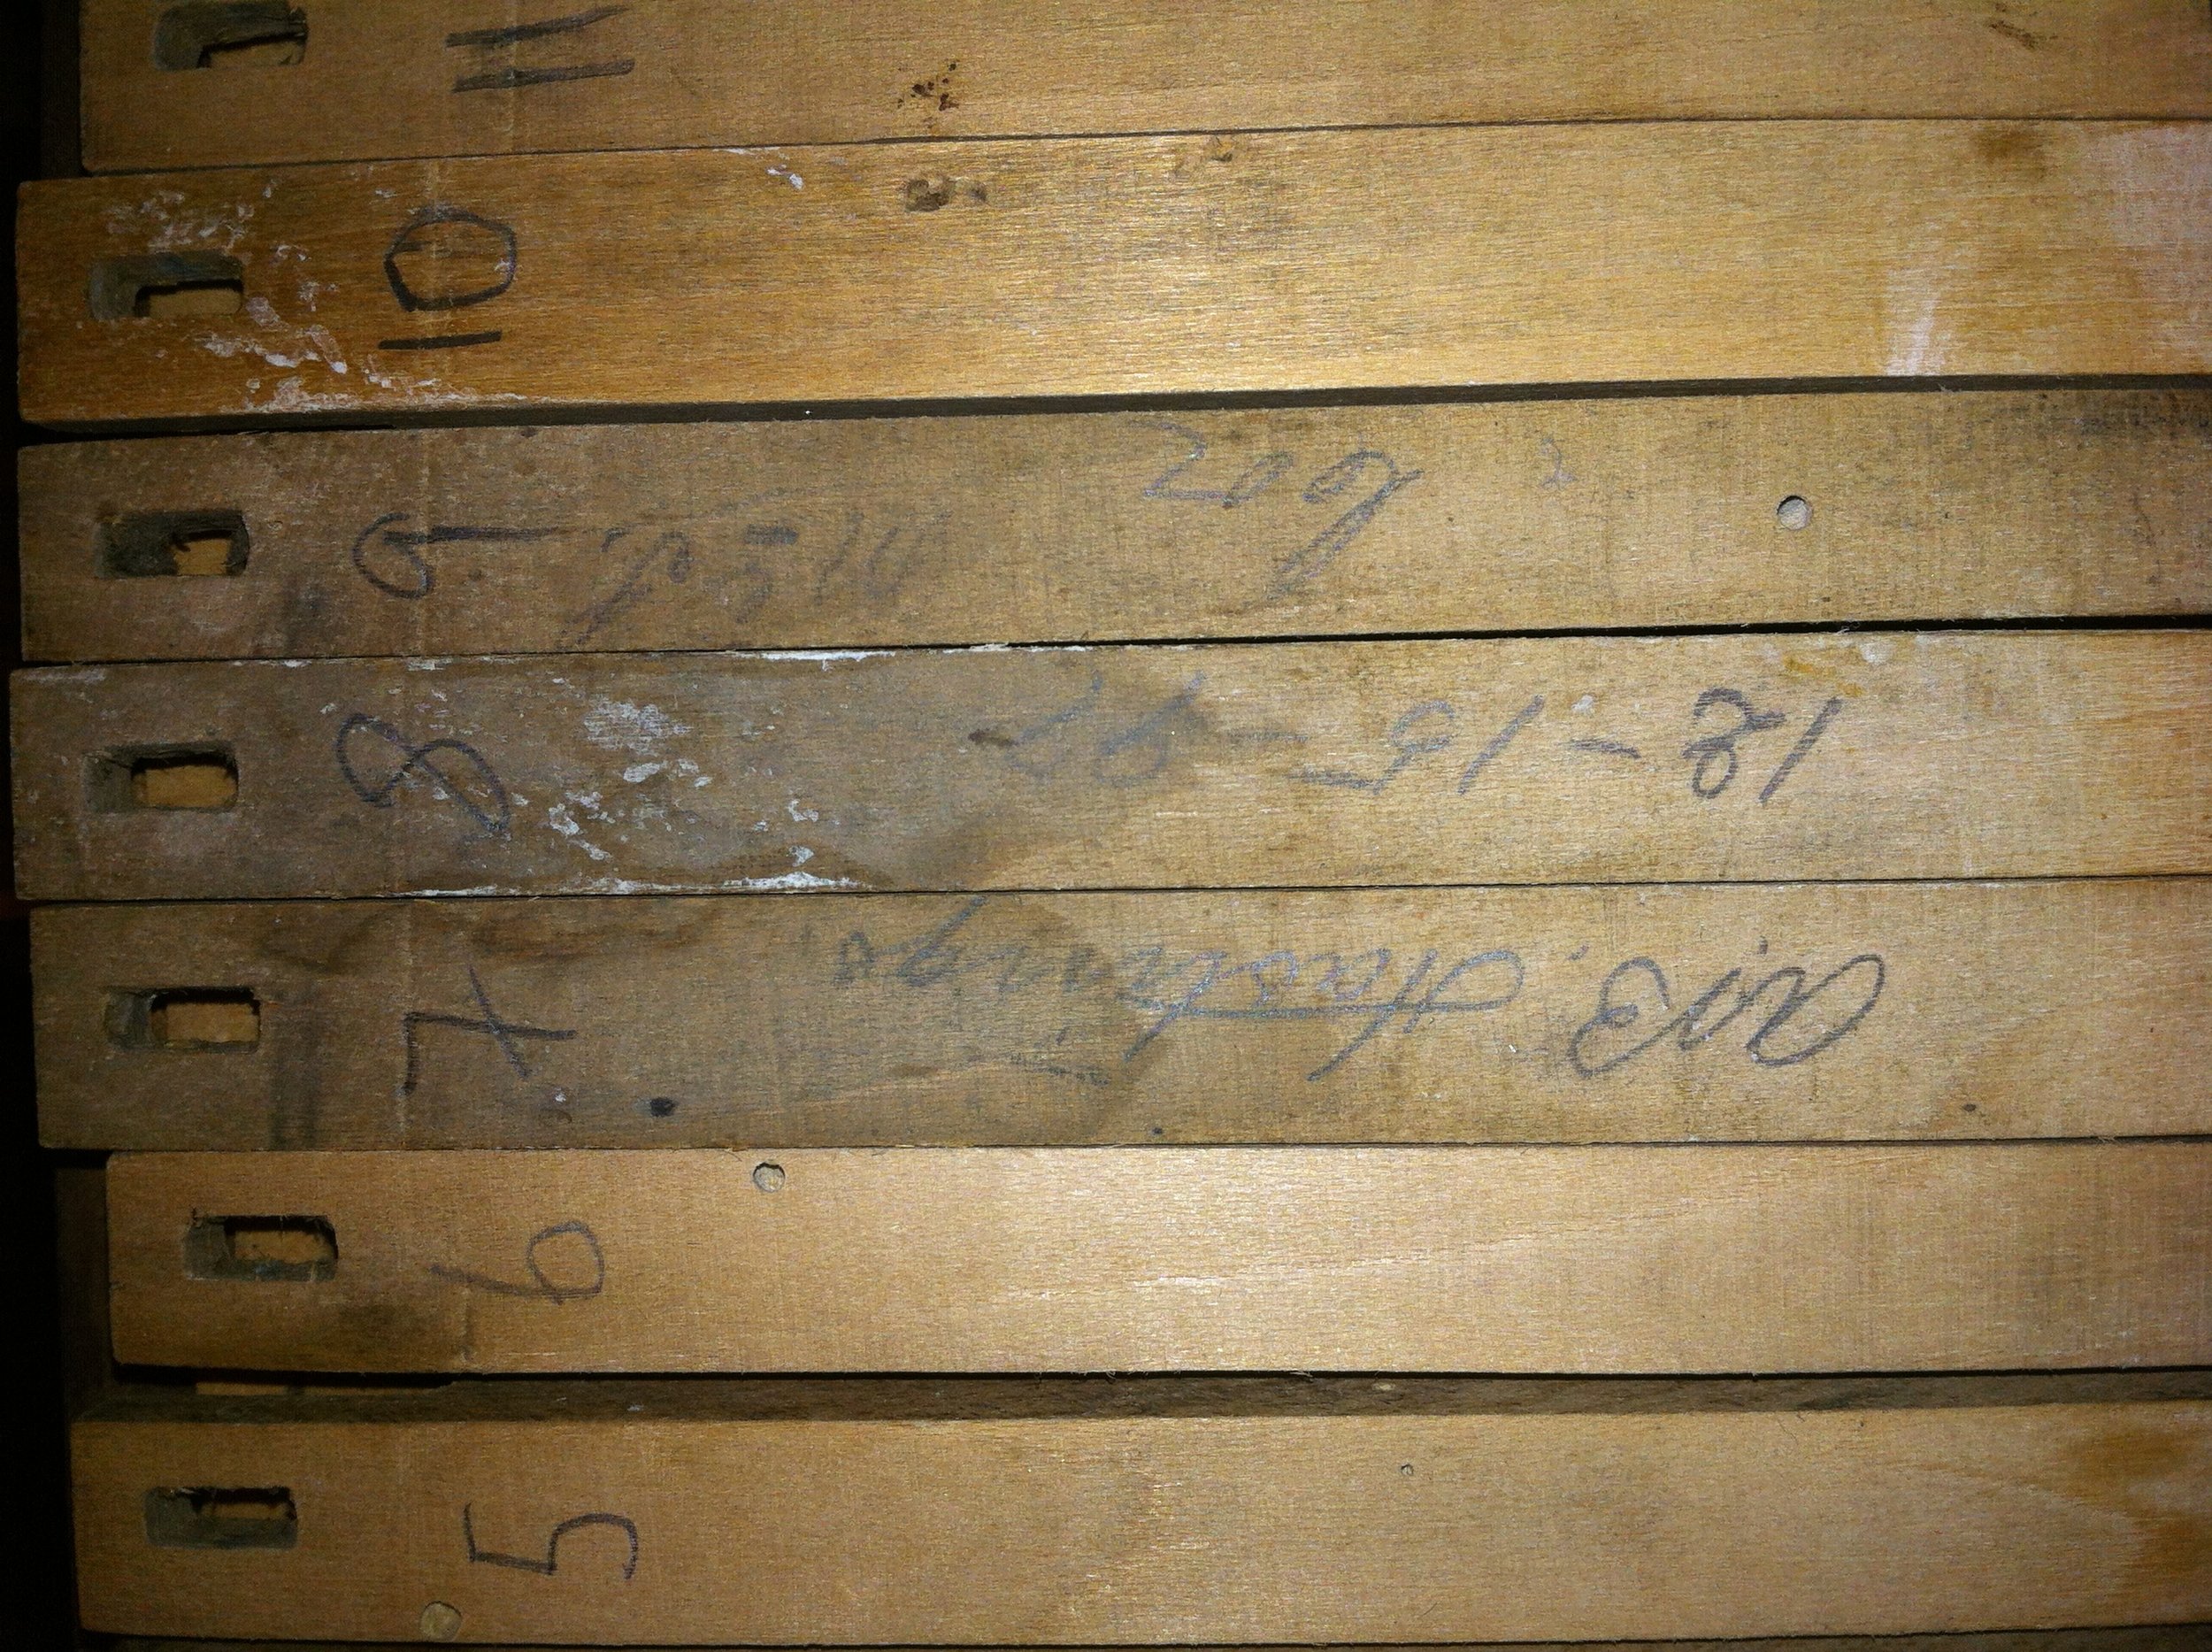  A signature on the keys indicates the name of the person who tuned the organ before it left the factory. It also dates the organ to 1897. It reads AB Hastings 12-15-97 